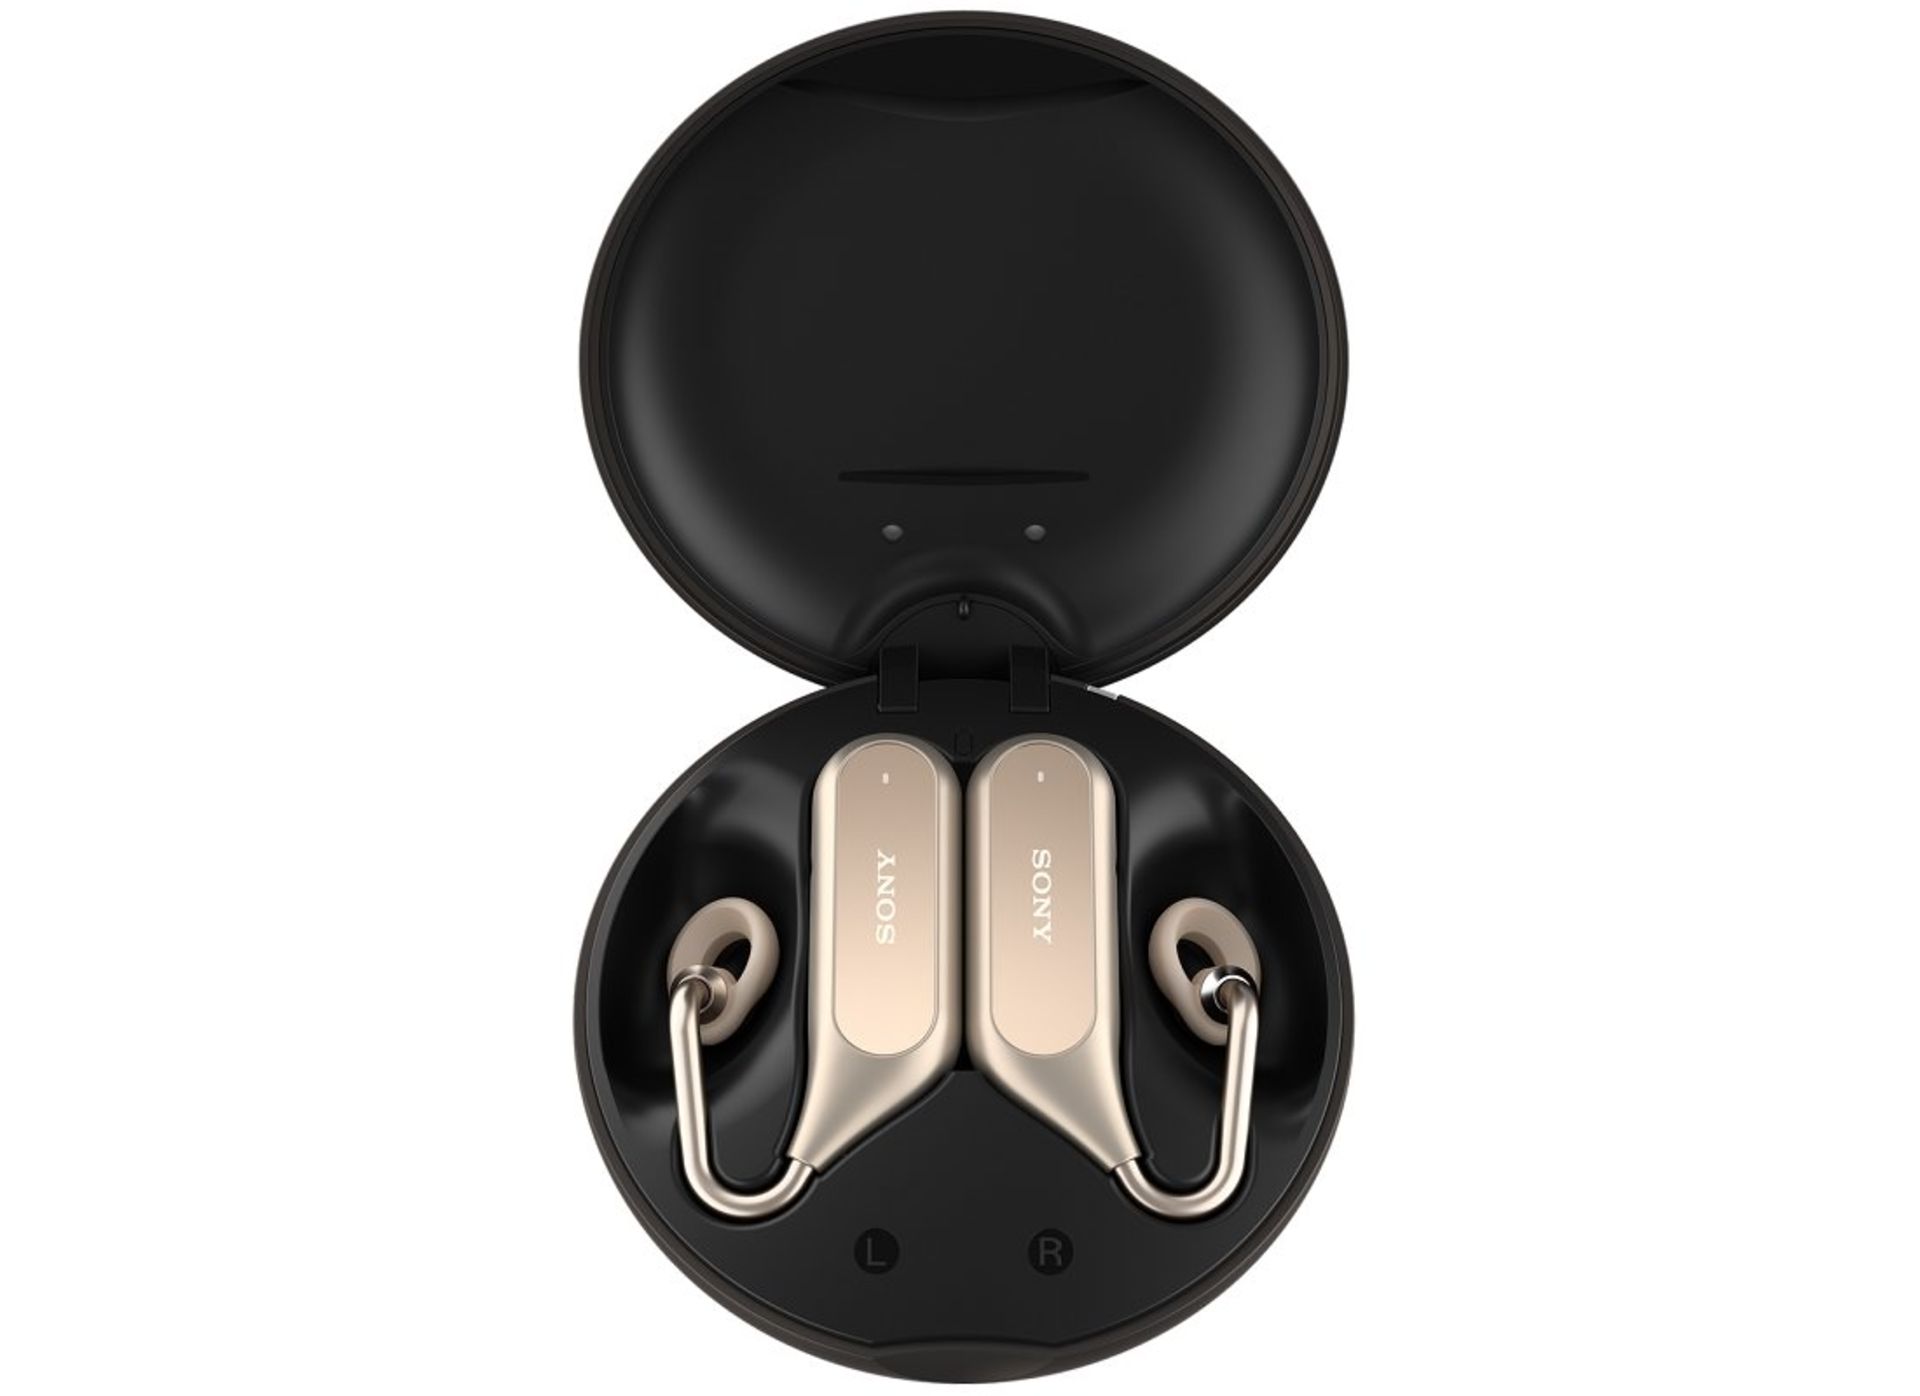 Sony’s Xperia Ear Duo earbuds